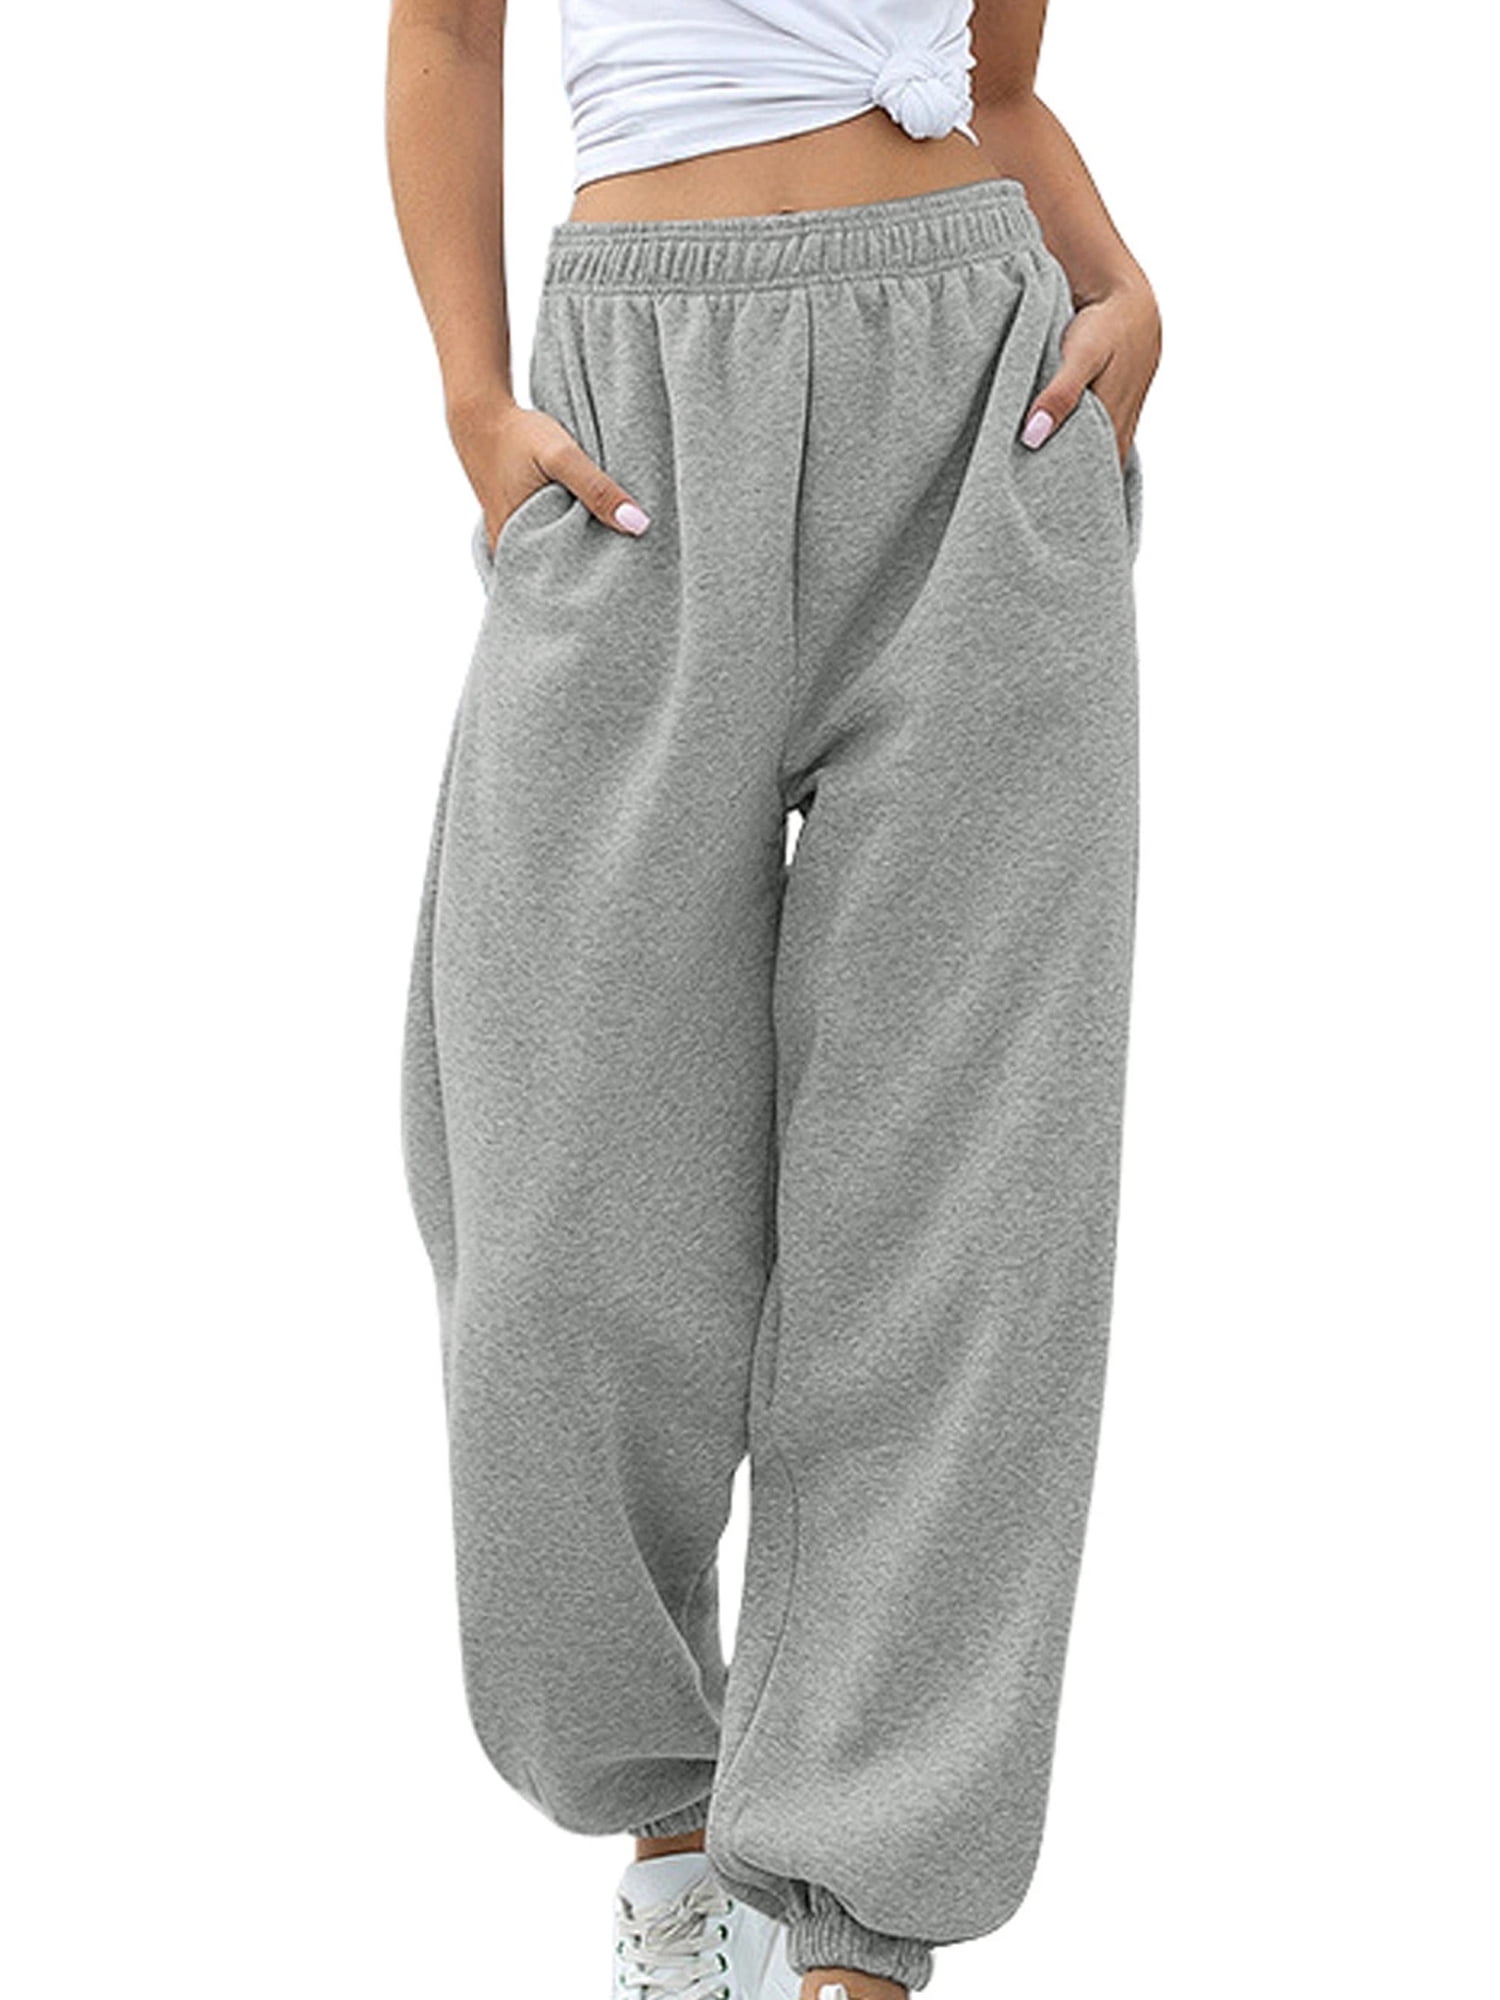 Je-ep Dog Paw Womens Casual Sweatpants Fitness Training Jogger Pant 